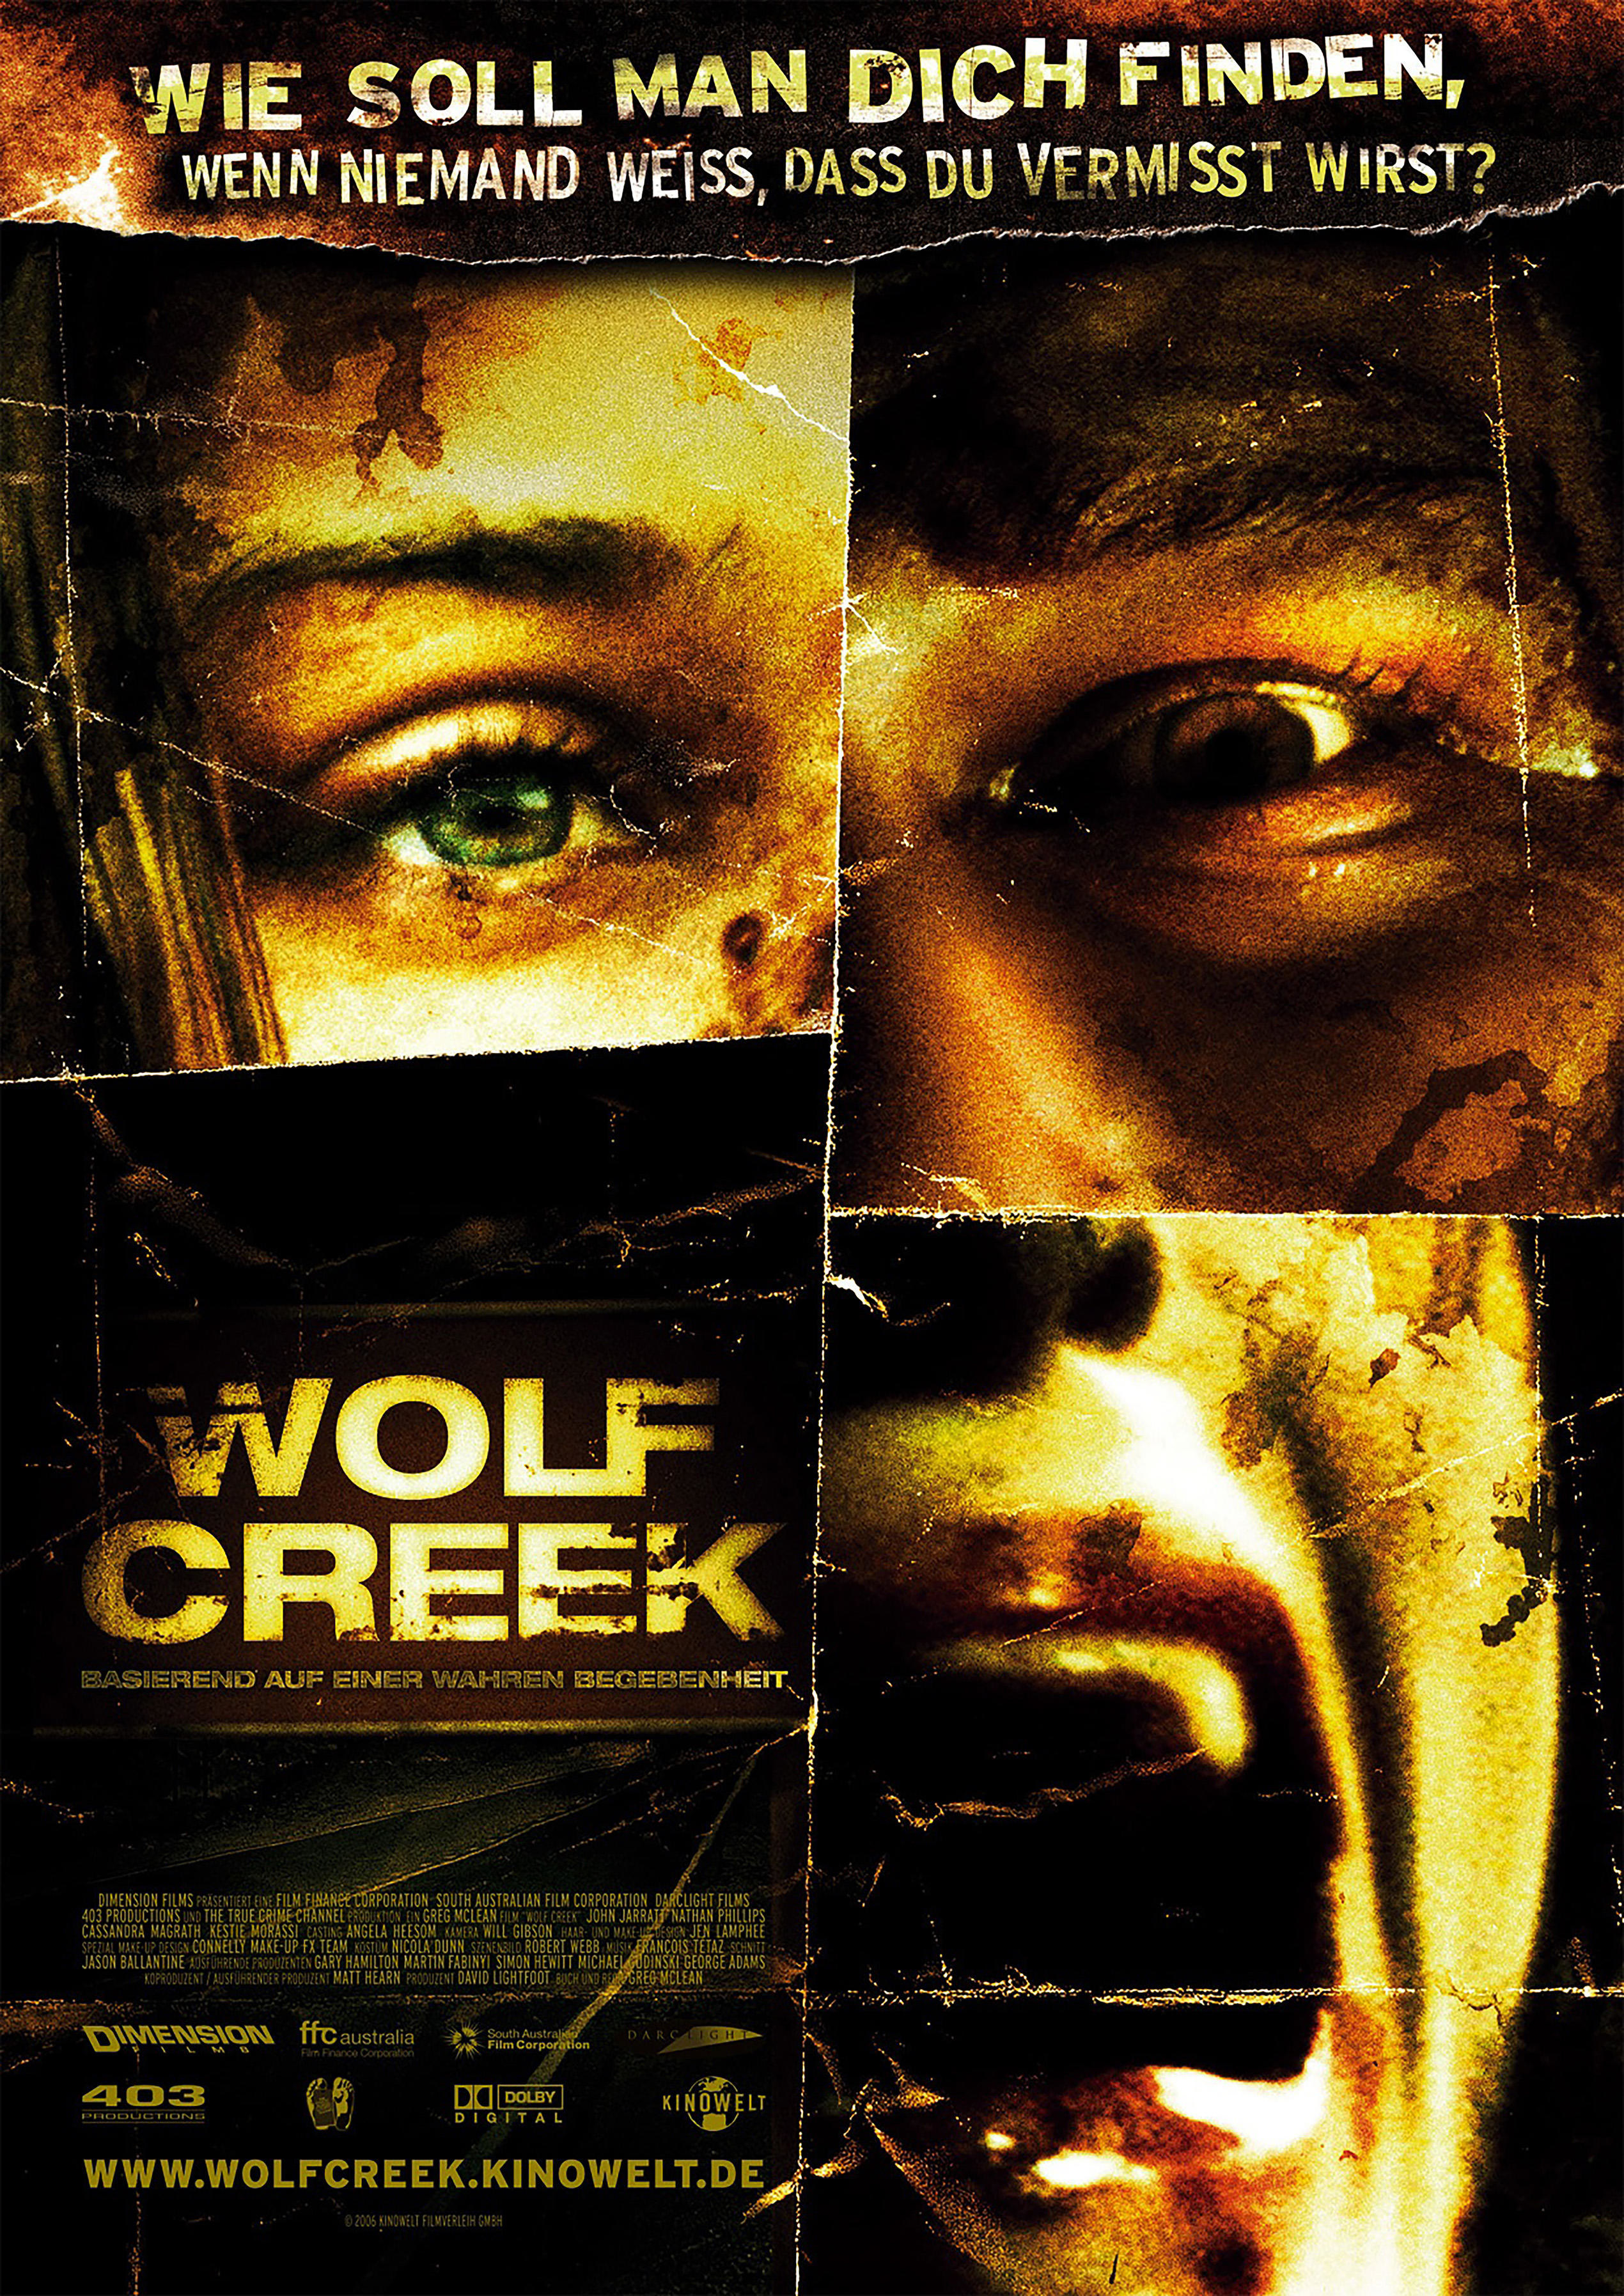 Poster image for the movie &quot;Wolf Creek&quot; depicting four faces stitched together to create one screaming face